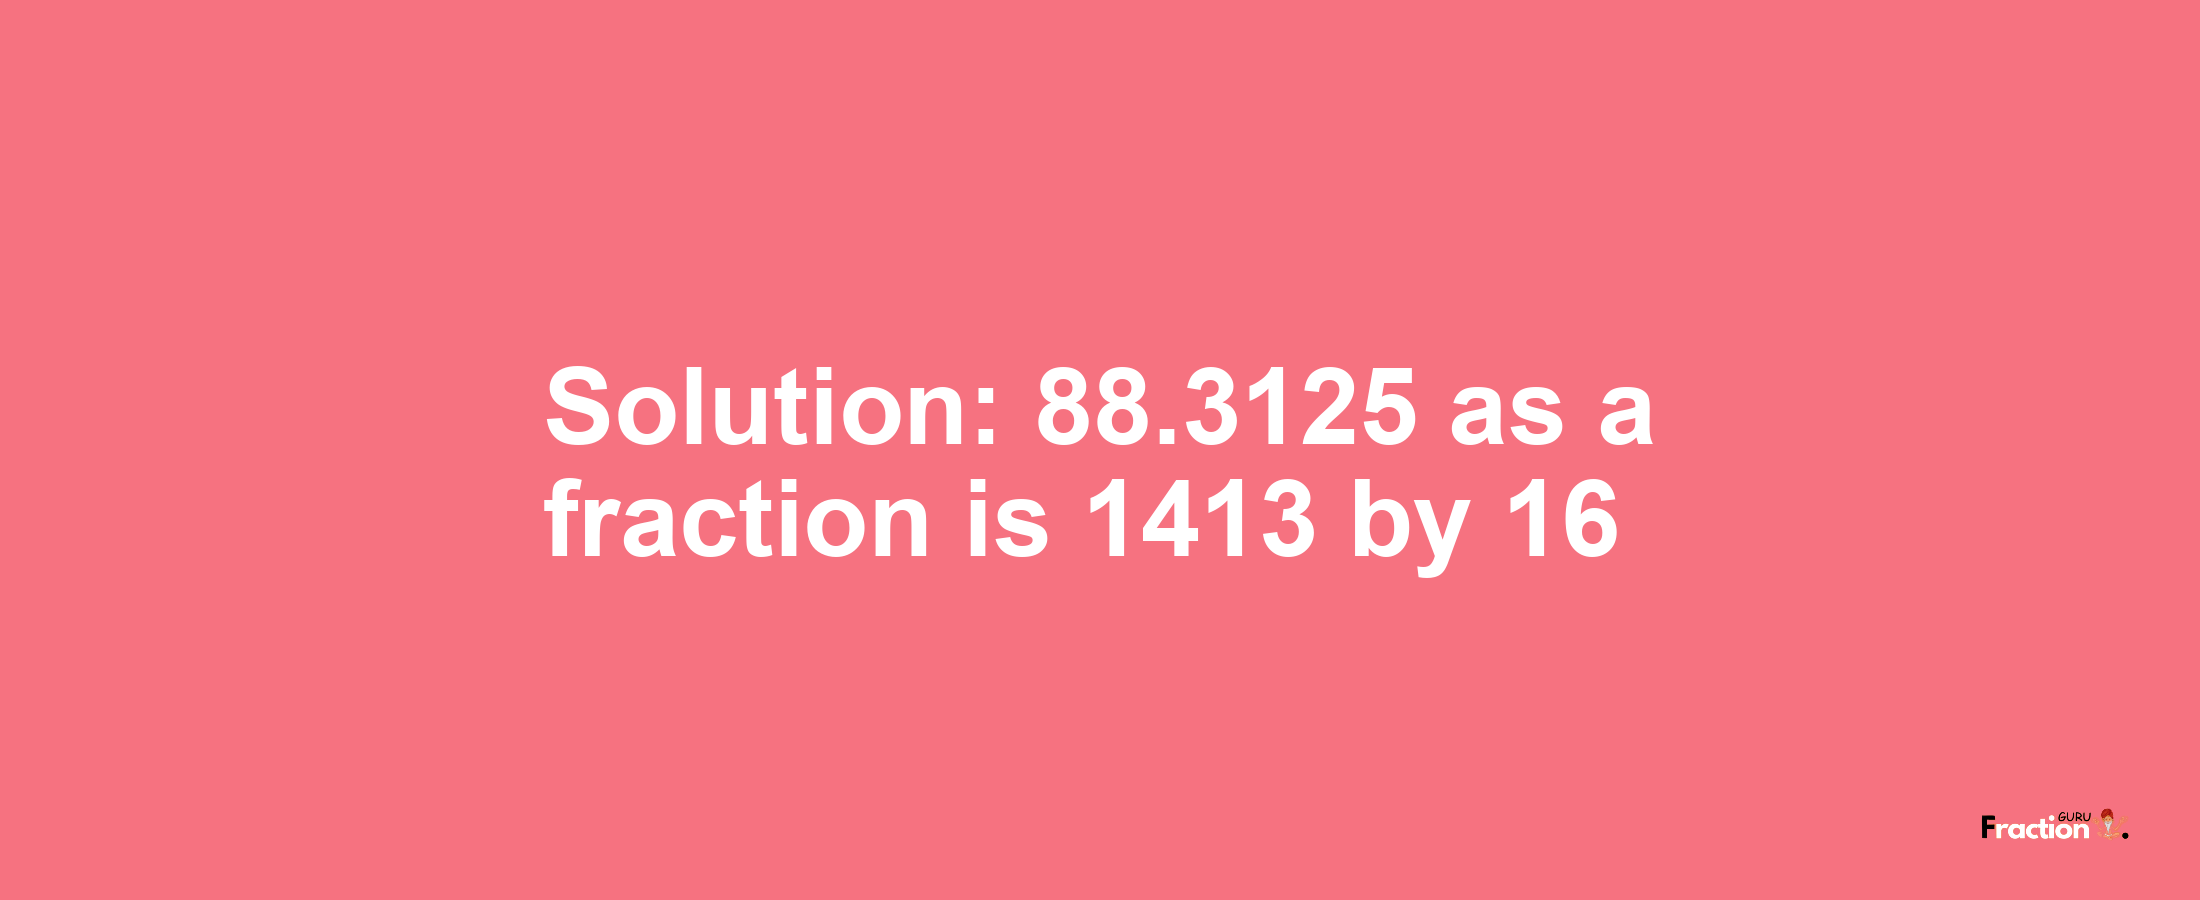 Solution:88.3125 as a fraction is 1413/16